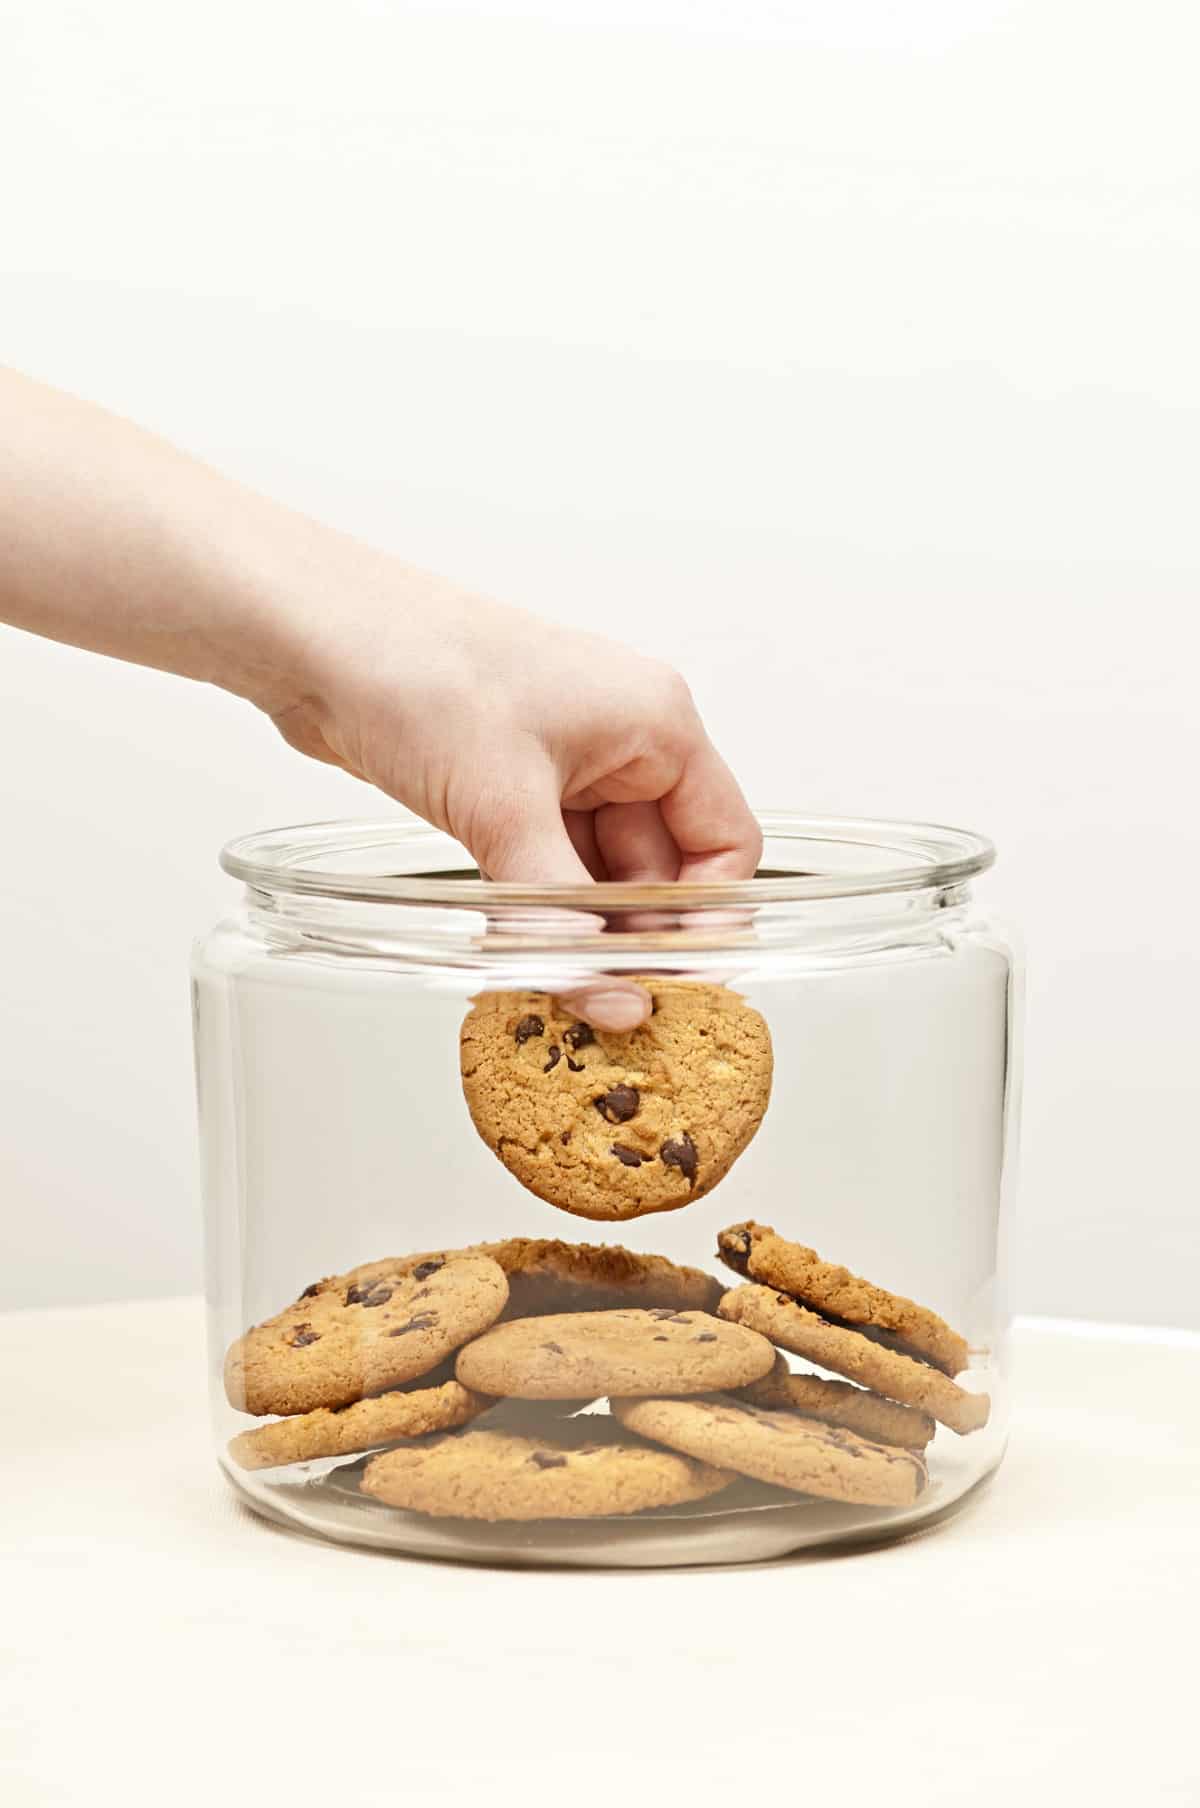 Chocolate chip cookies in a jar with a hand.